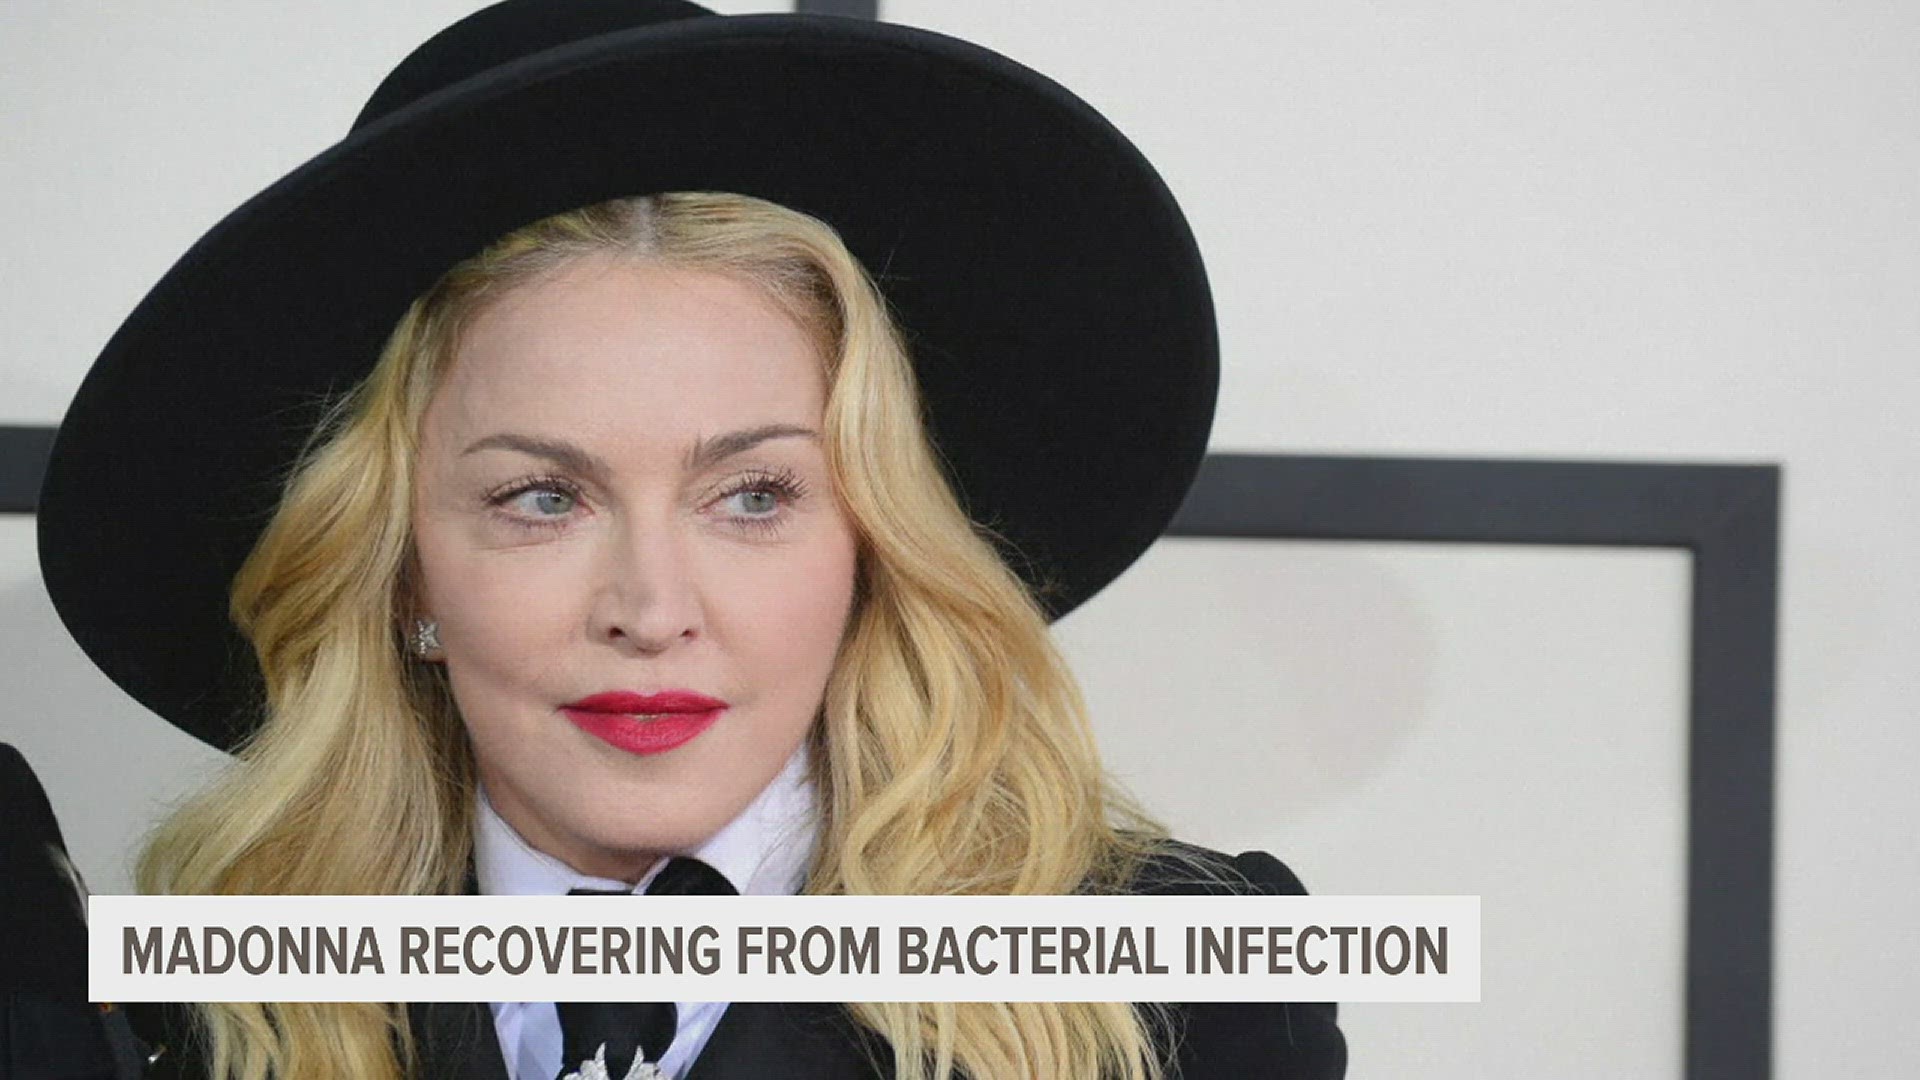 Madonna was rushed to a hospital after being found unresponsive over the weekend. She's spent several days in the ICU, but is recovering.